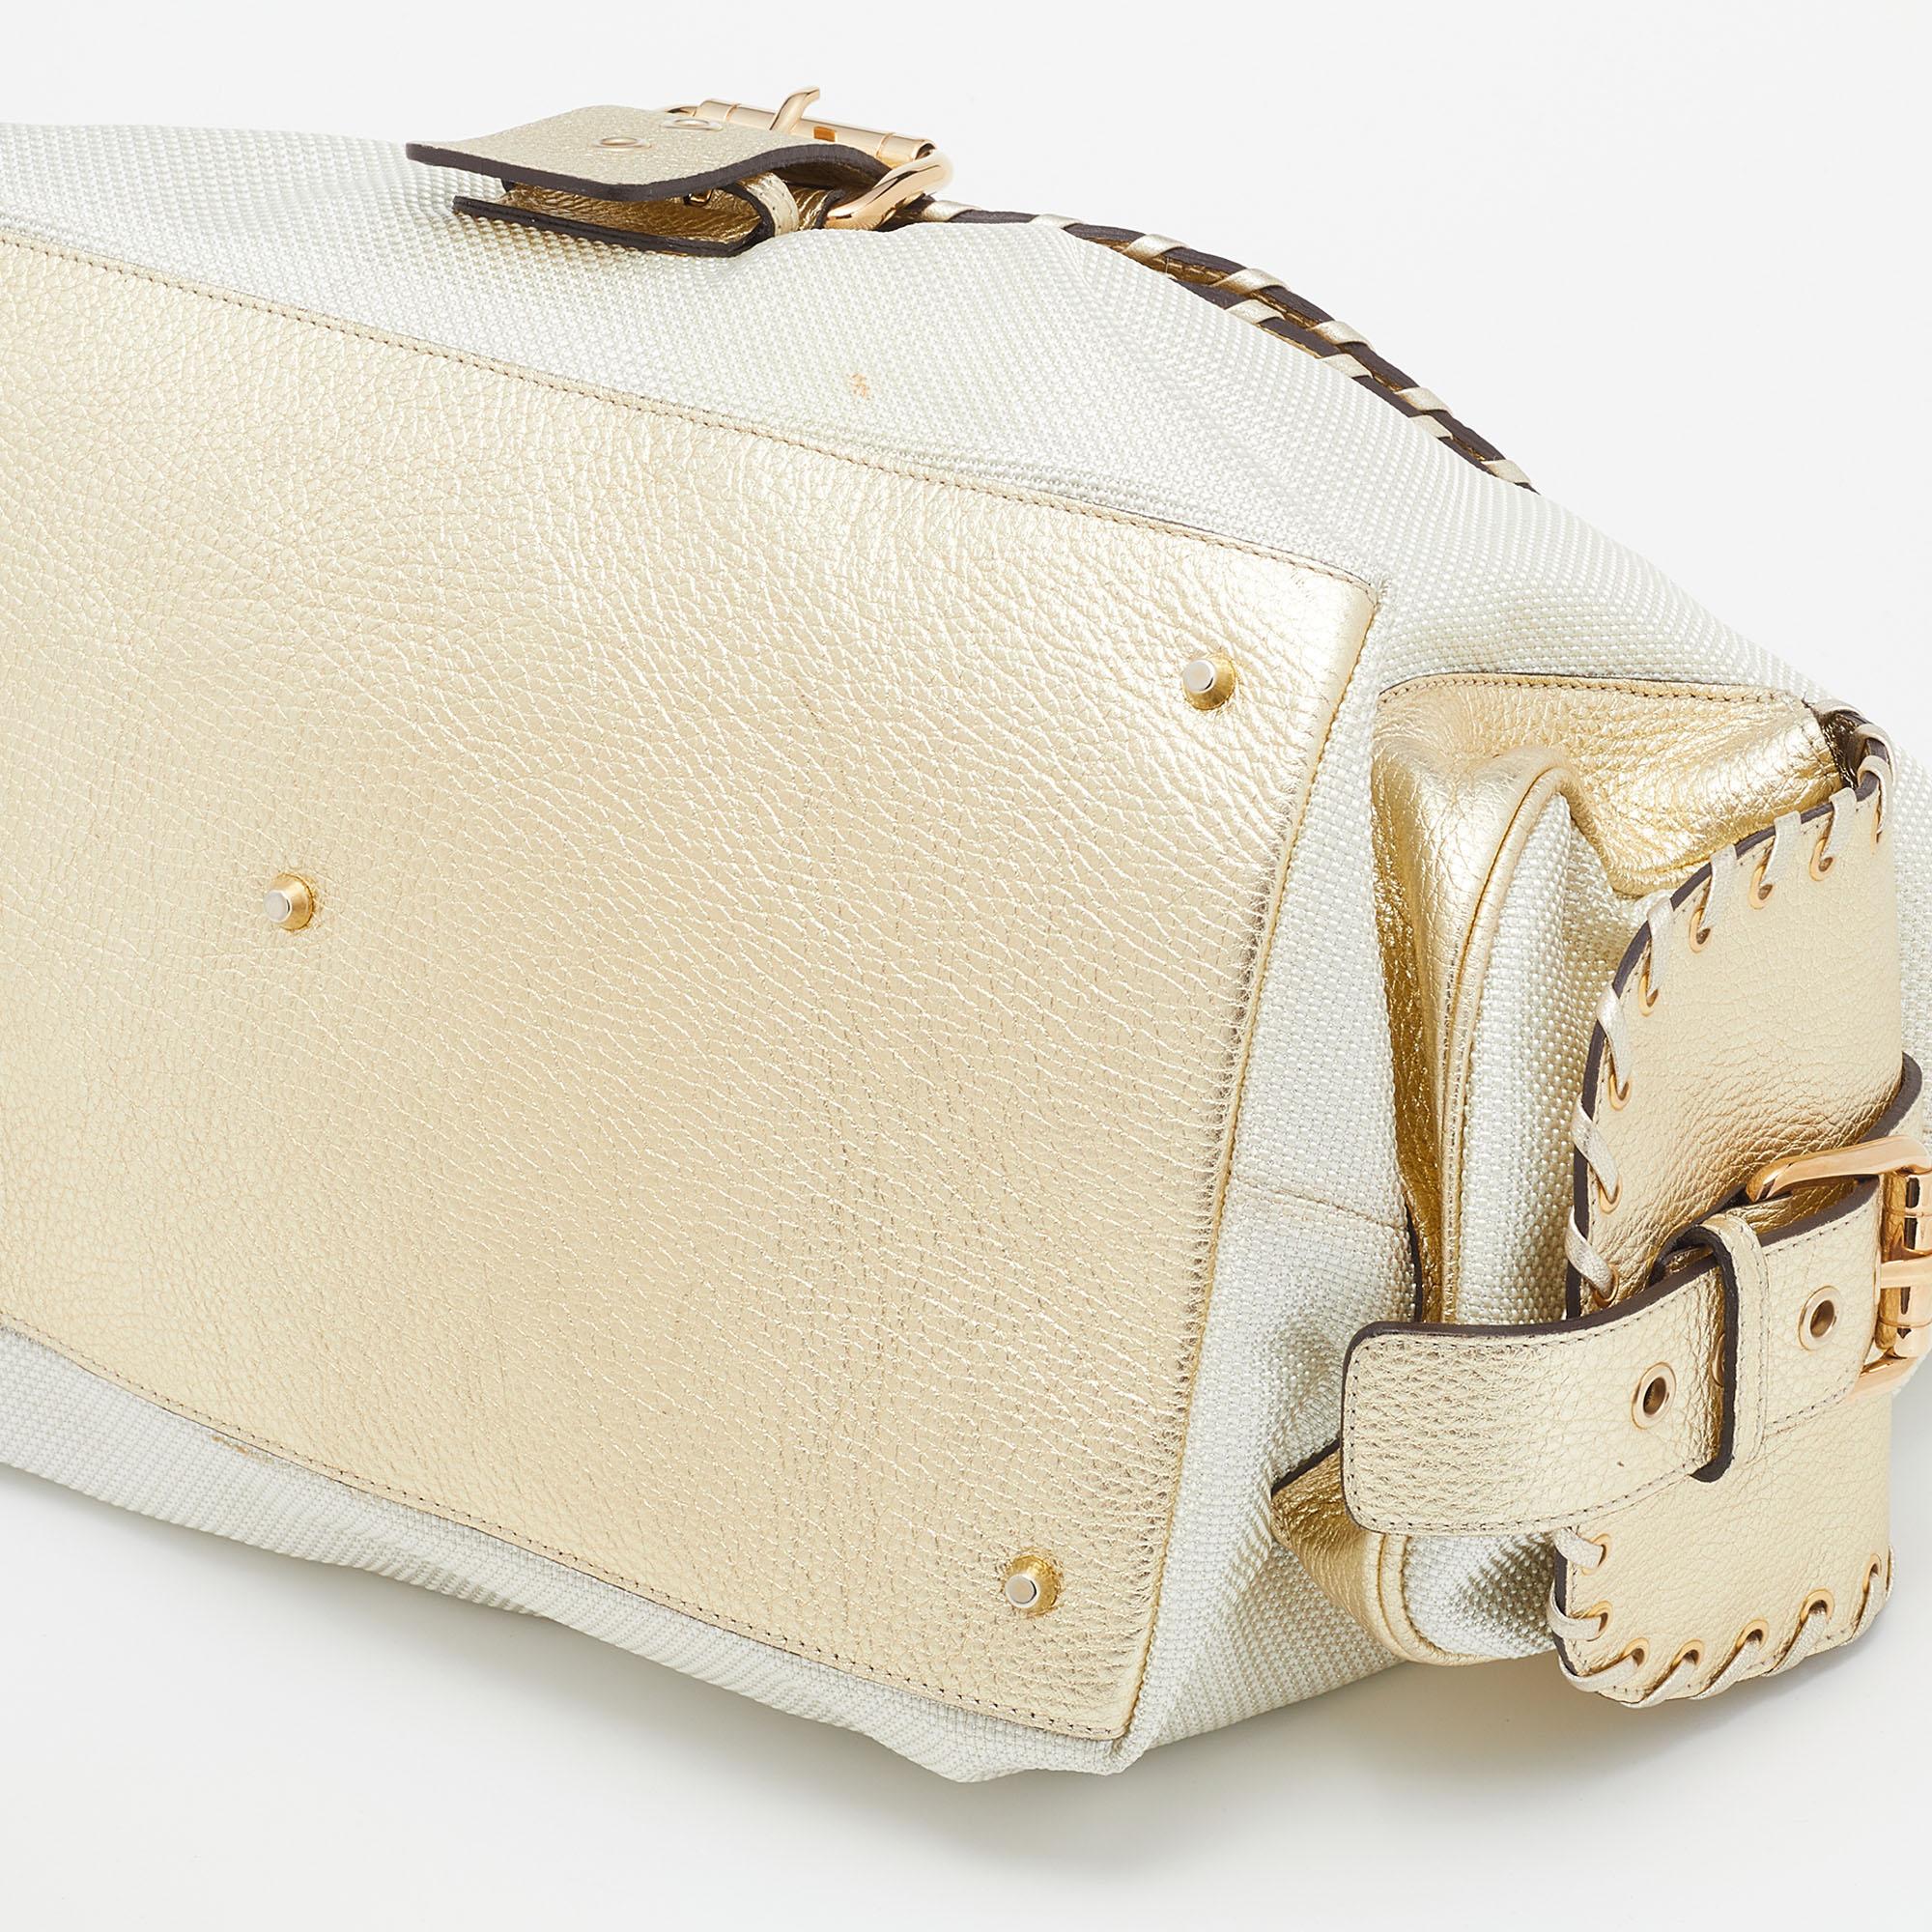 Versace Metallic Light Beige/Gold Technical Fabric and Leather Satchel 1